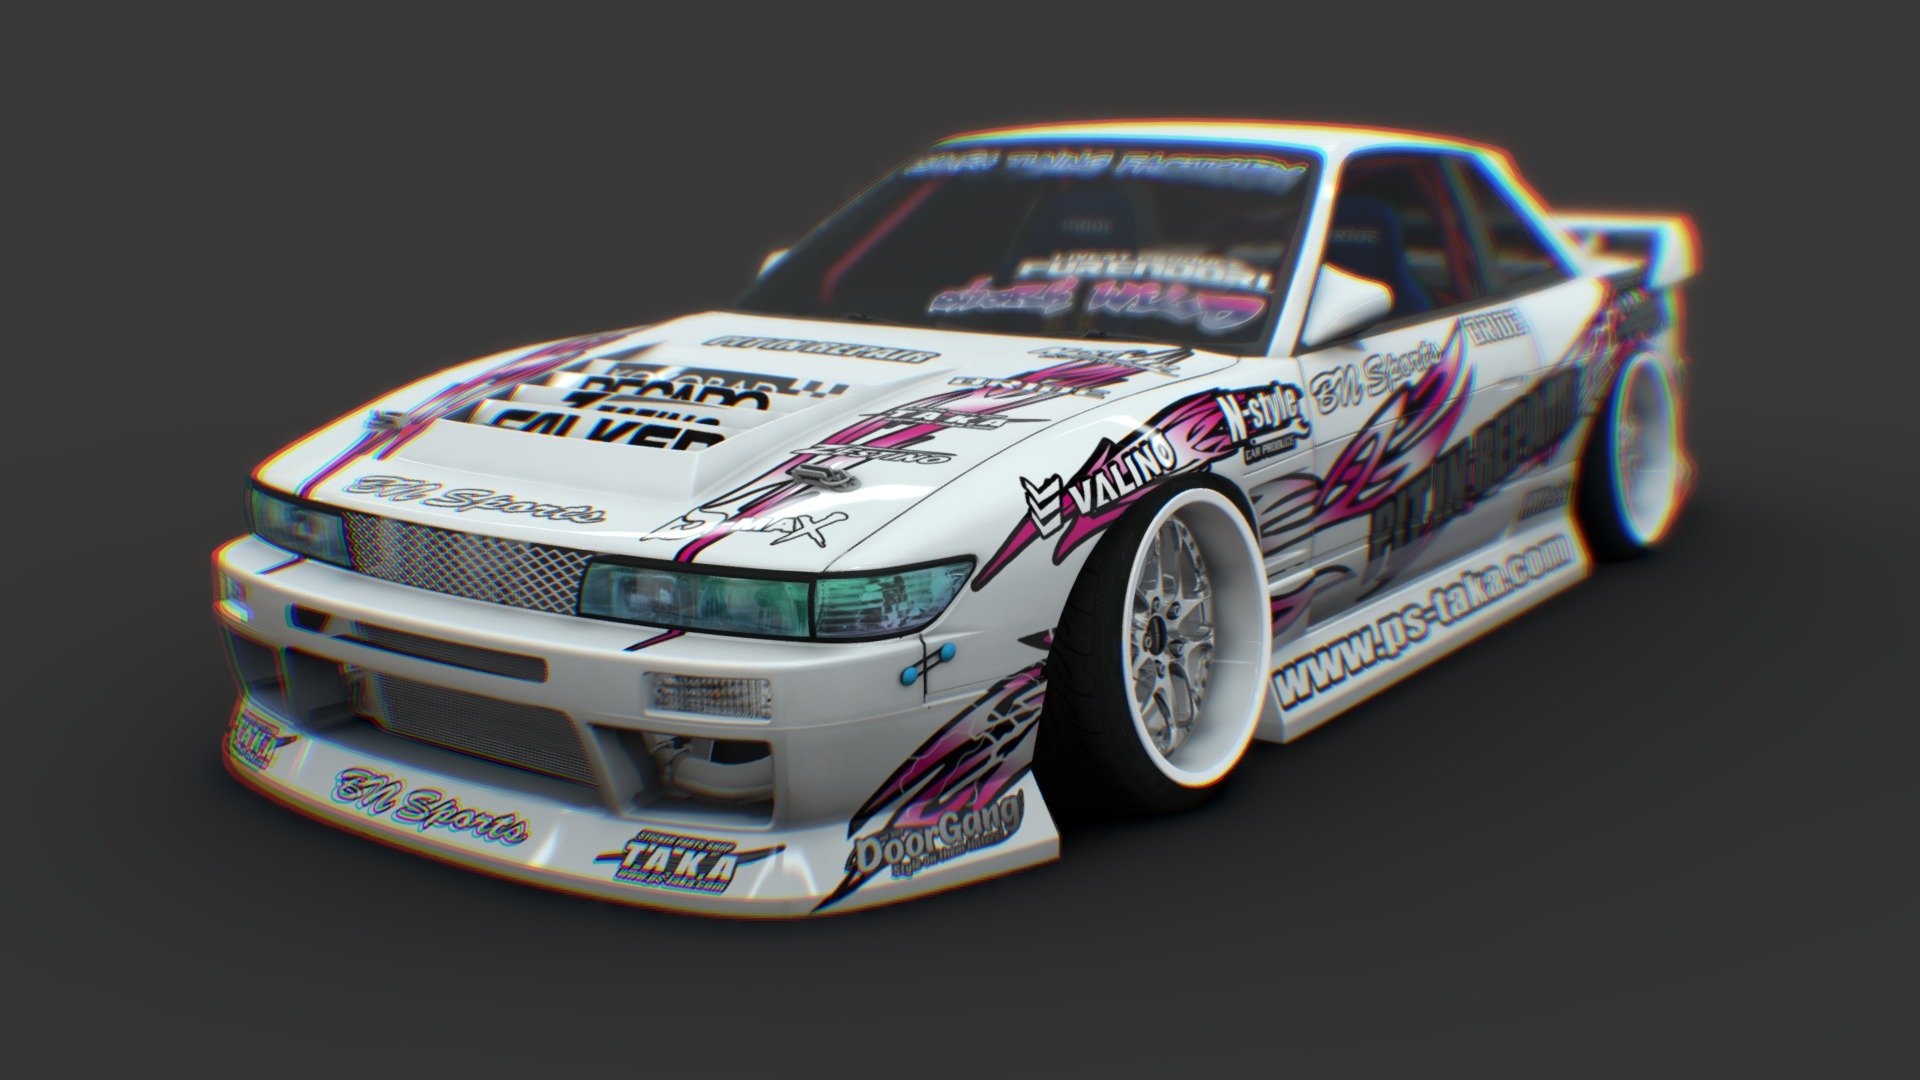 Hi everyone. You can donwload this car with that livery in VK:



Car author - Huinya Workshop (https://vk.com/club176312313)

Livery author - Ahegao Custom (https://vk.com/nobody_need_custom)
 - Nissan Silvia S13 BN Sport - 3D model by Ahegao Custom (@ahegao_custom) 3d model